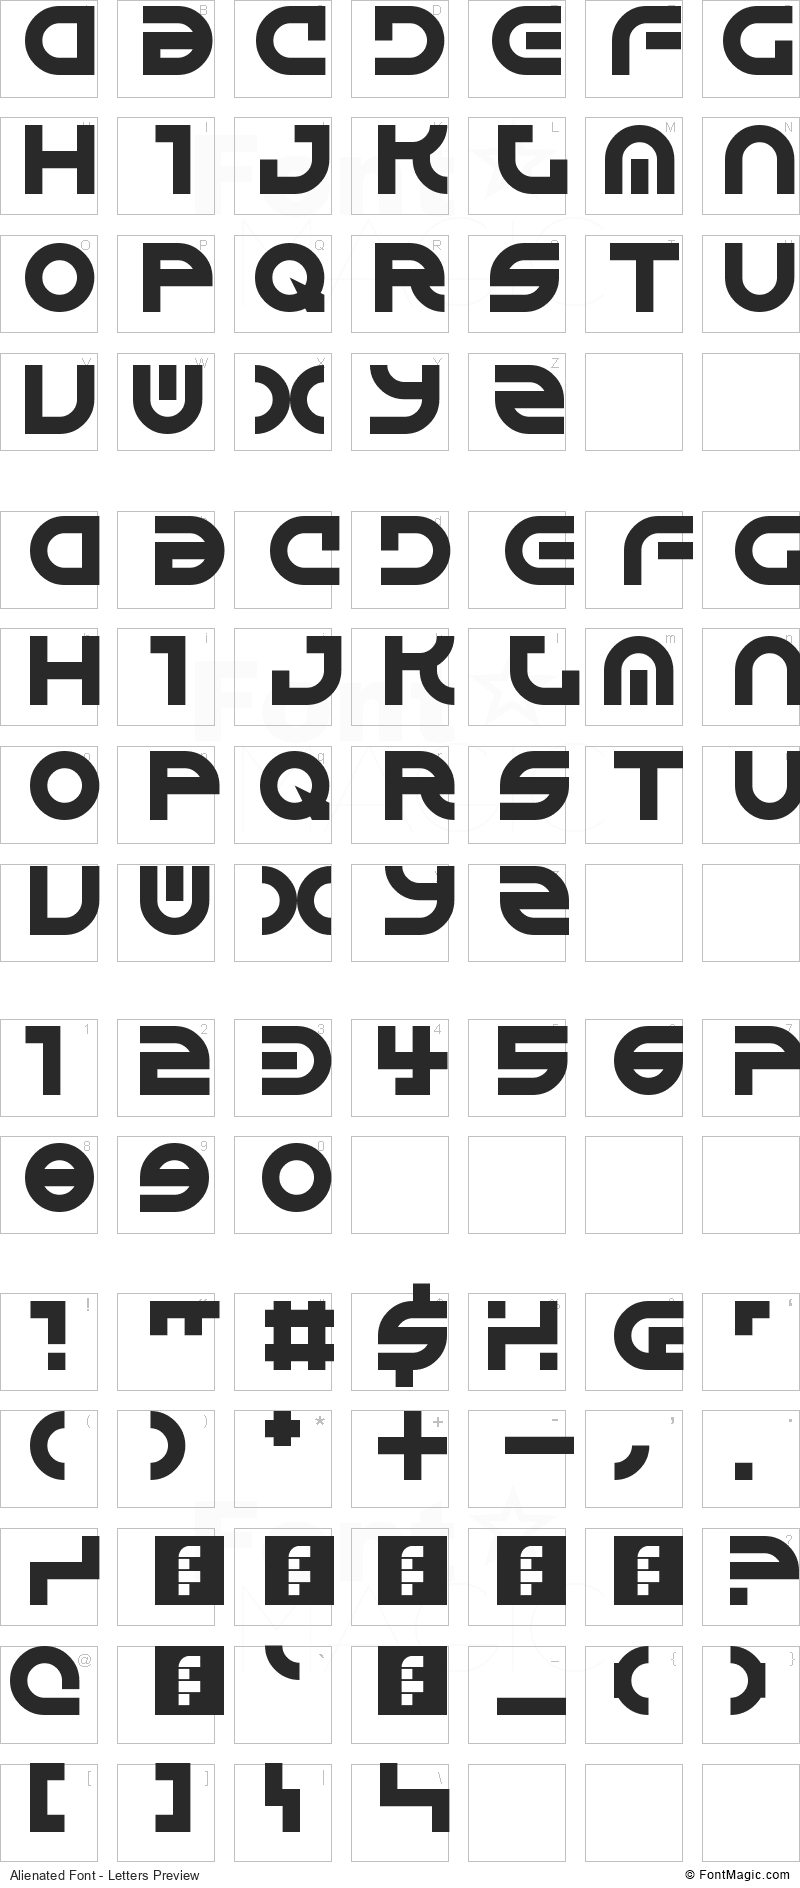 Alienated Font - All Latters Preview Chart